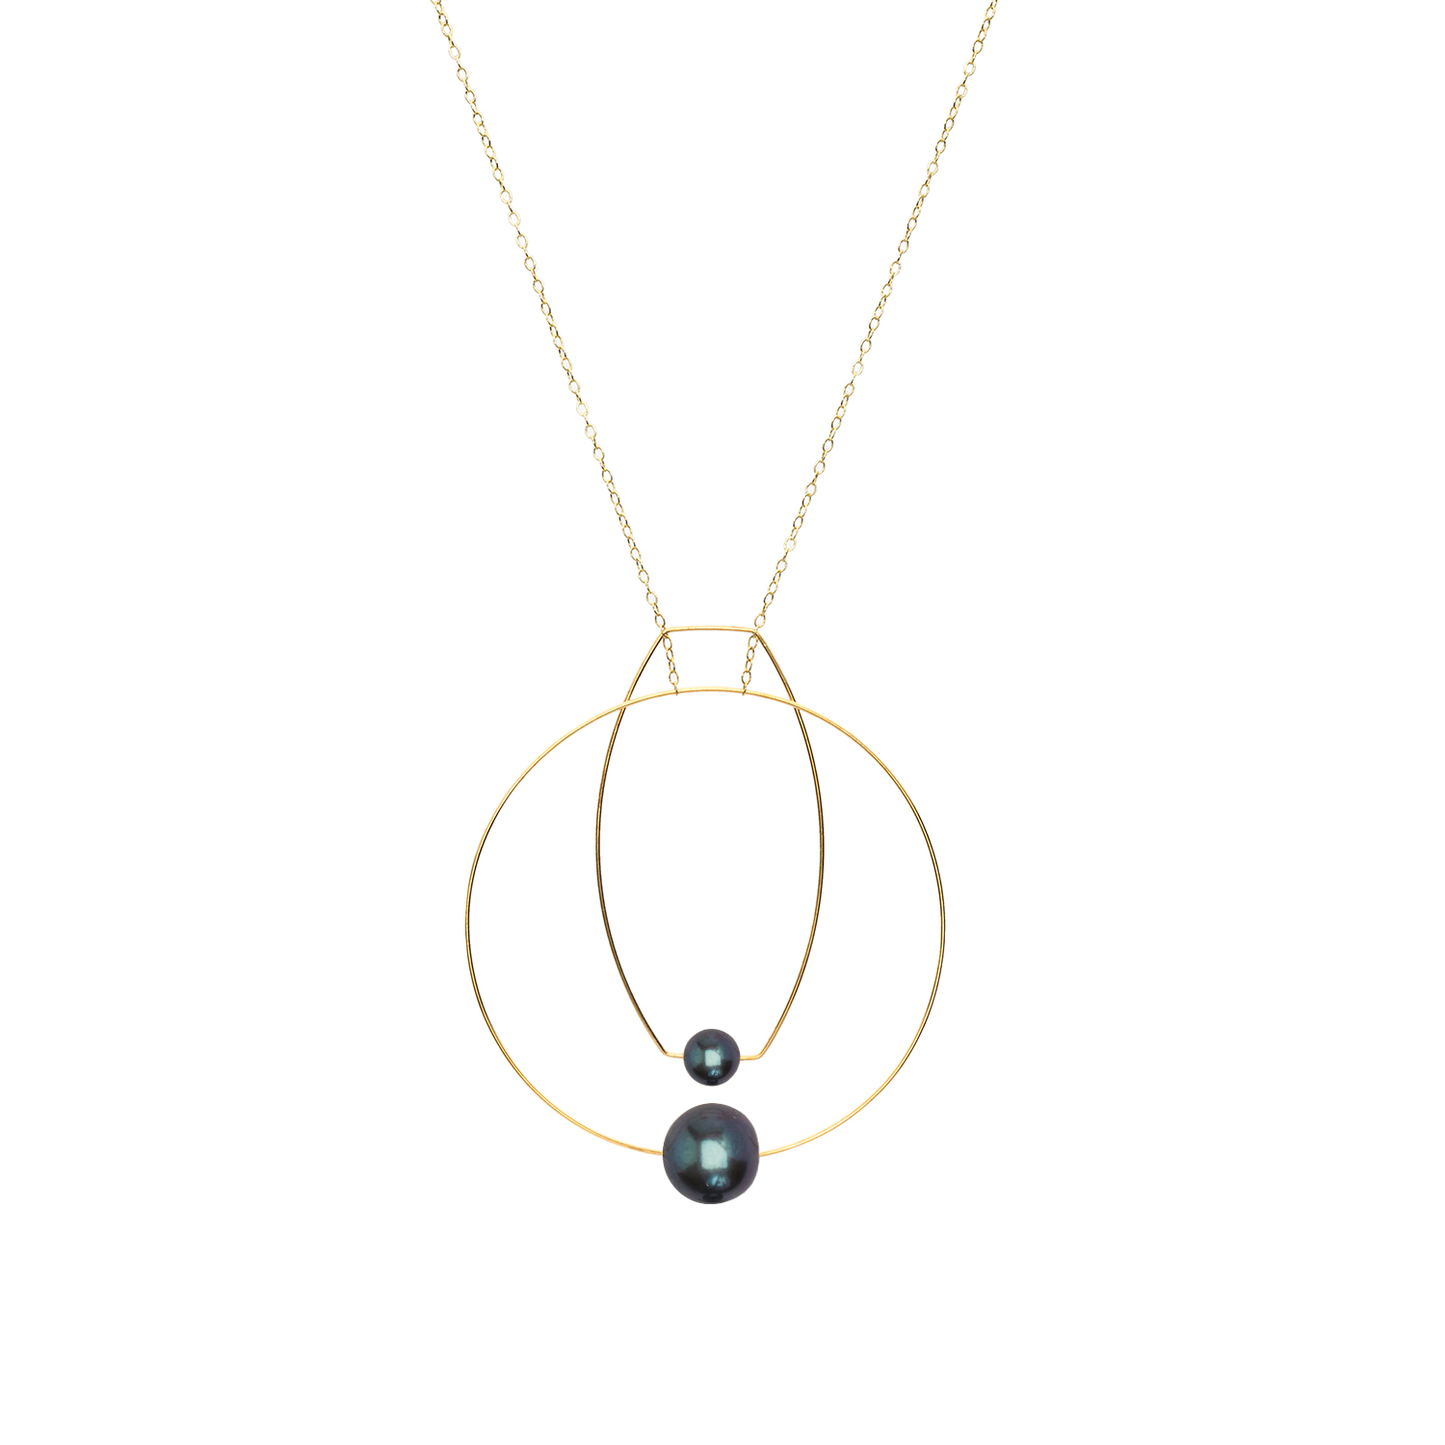 Multi Shape Necklace with Round Freshwater Pearls